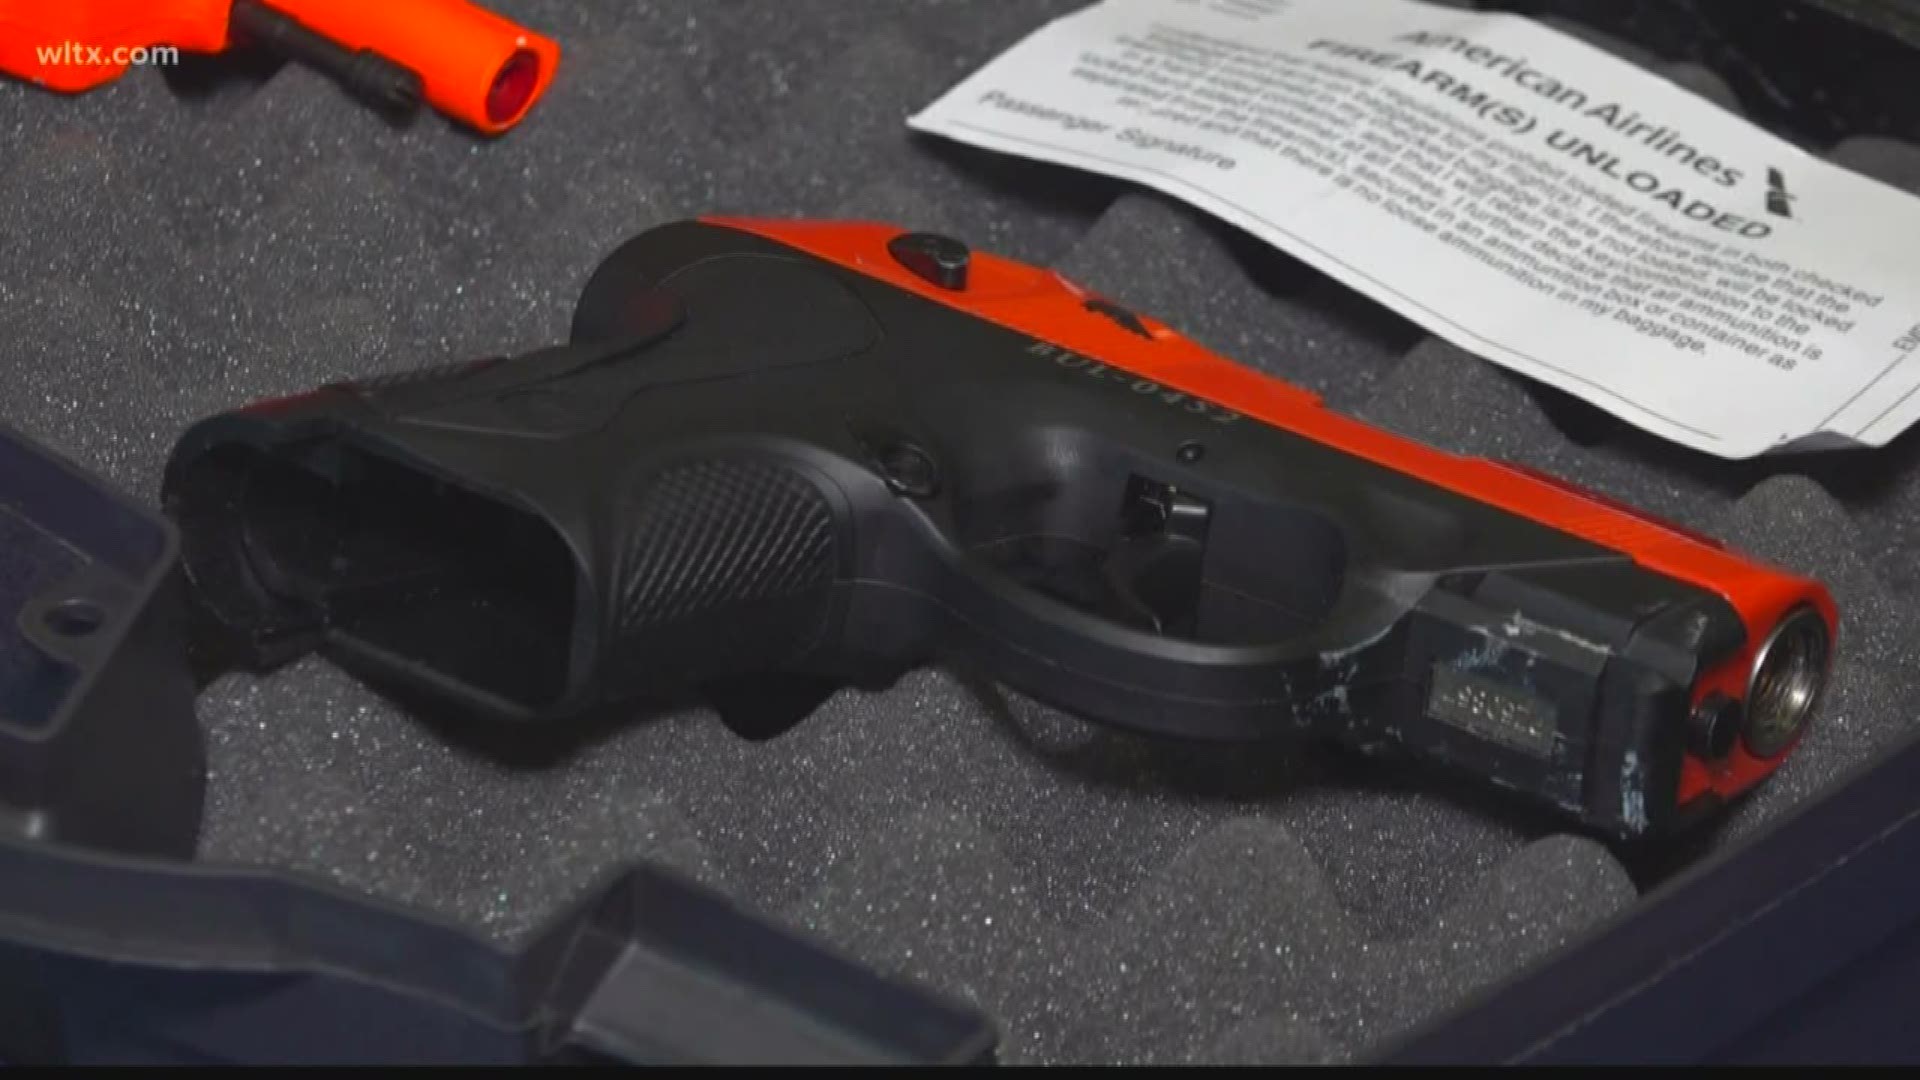 Not packing your firearm correctly when you're at the airport could cost you over $13,000.